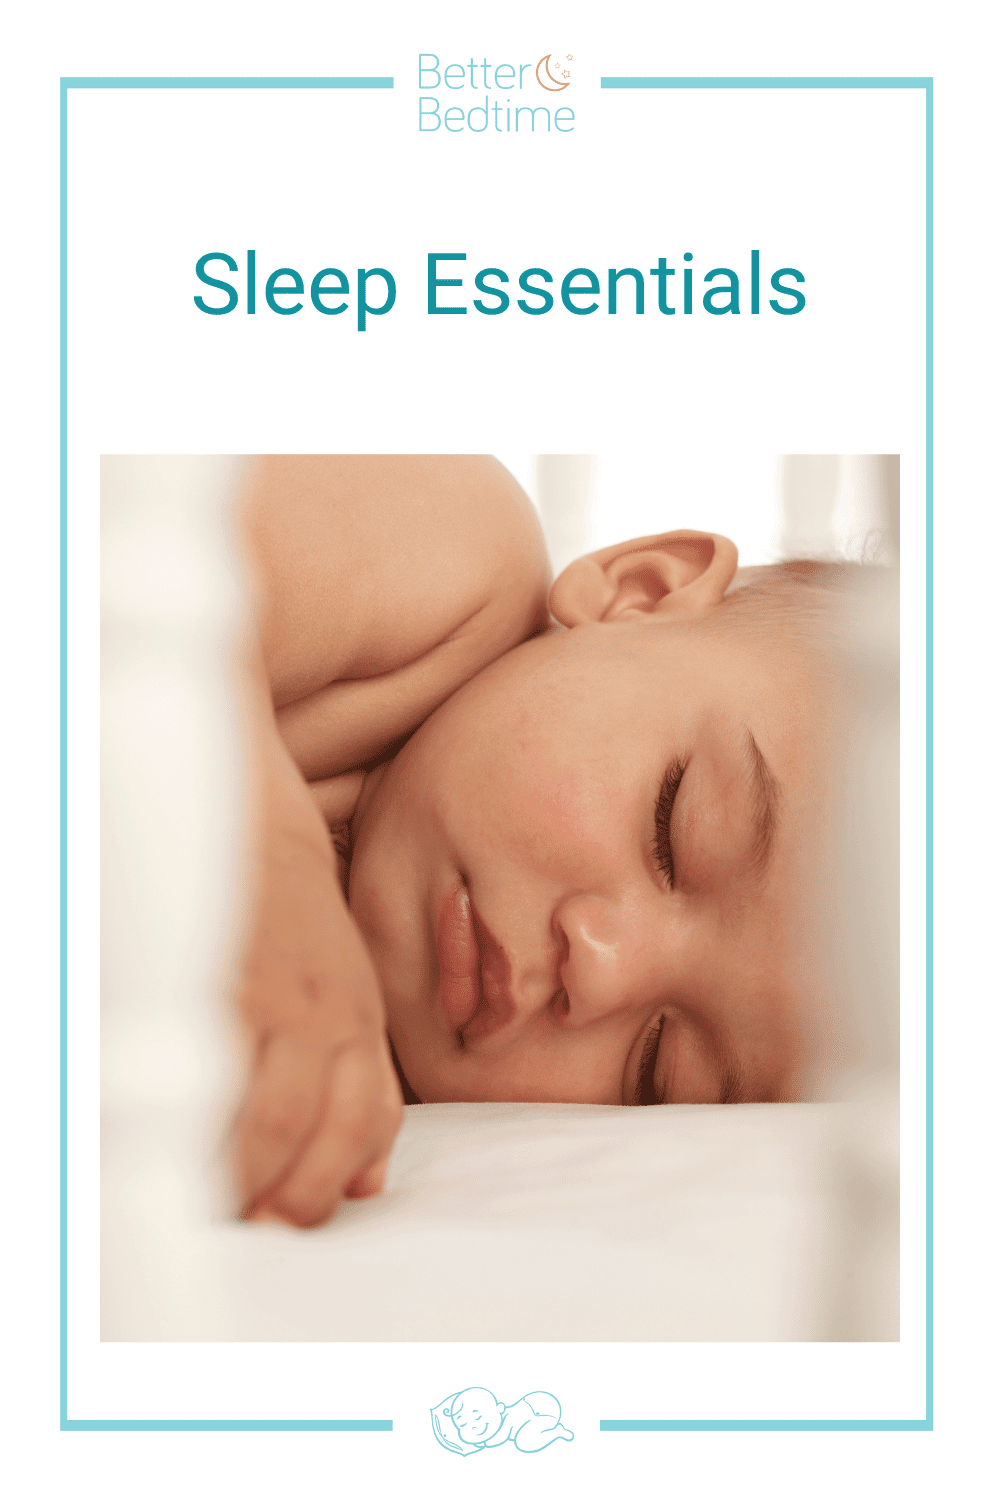 Sleep Support Recommendations